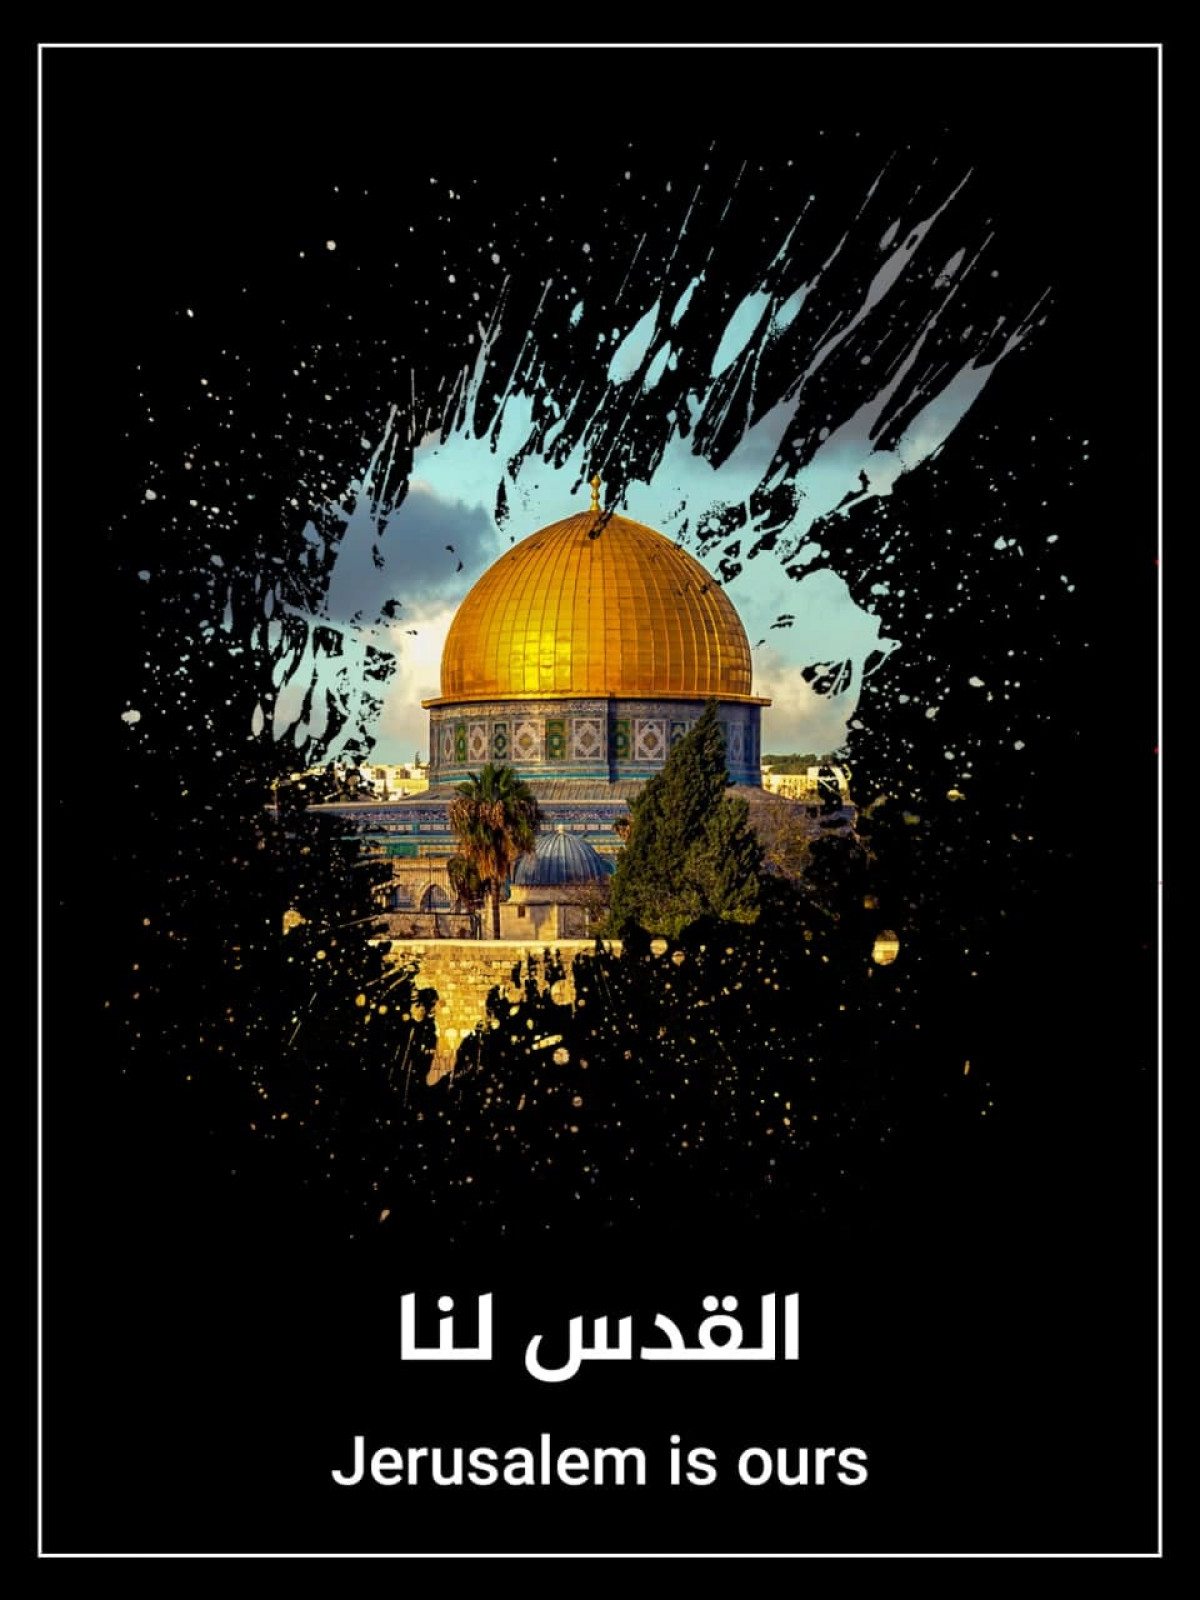 Collection of posters: Jerusalem is ours